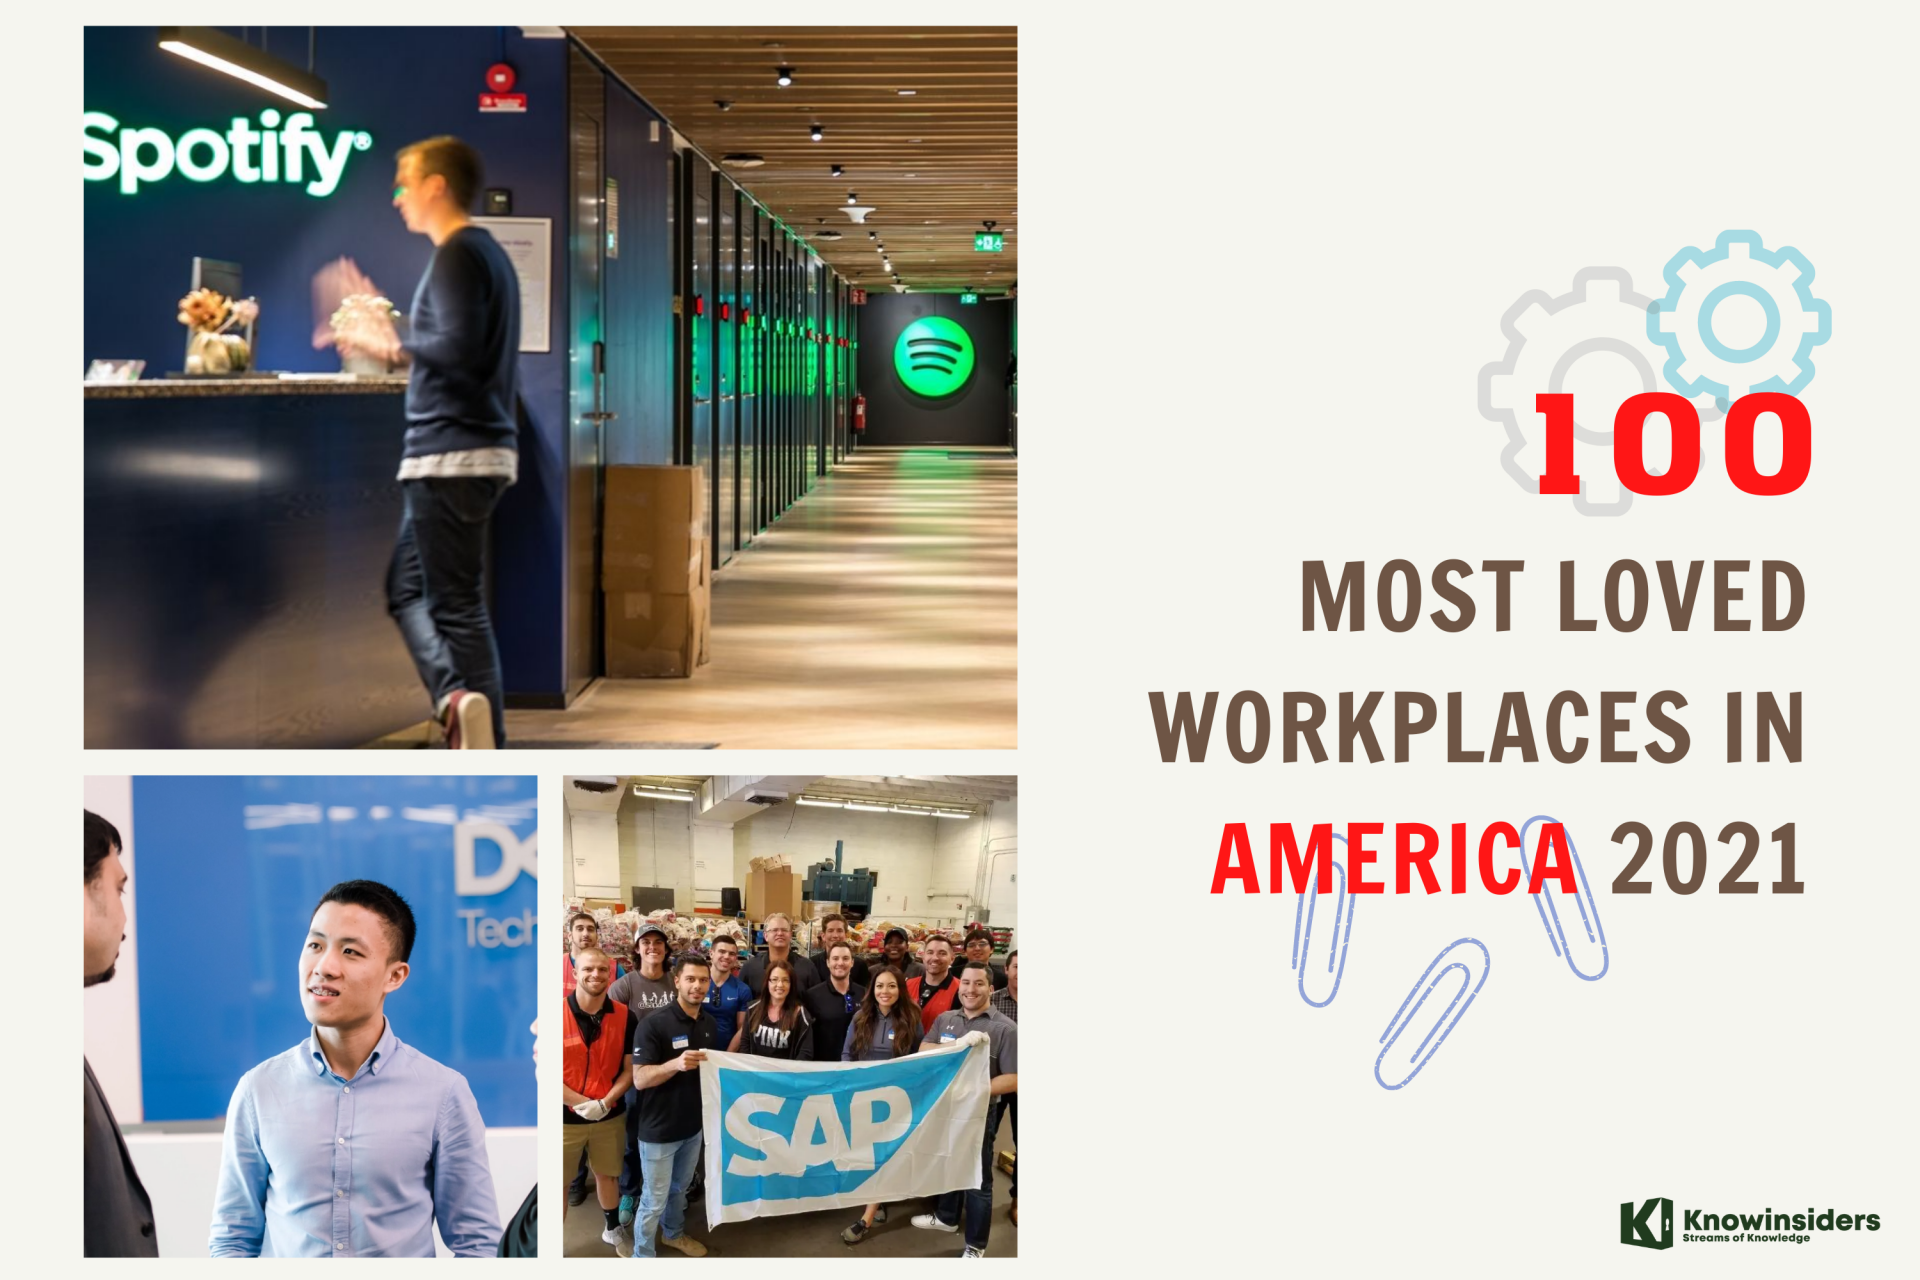 The Full List Of Top 100 Most Loved Workplaces in America